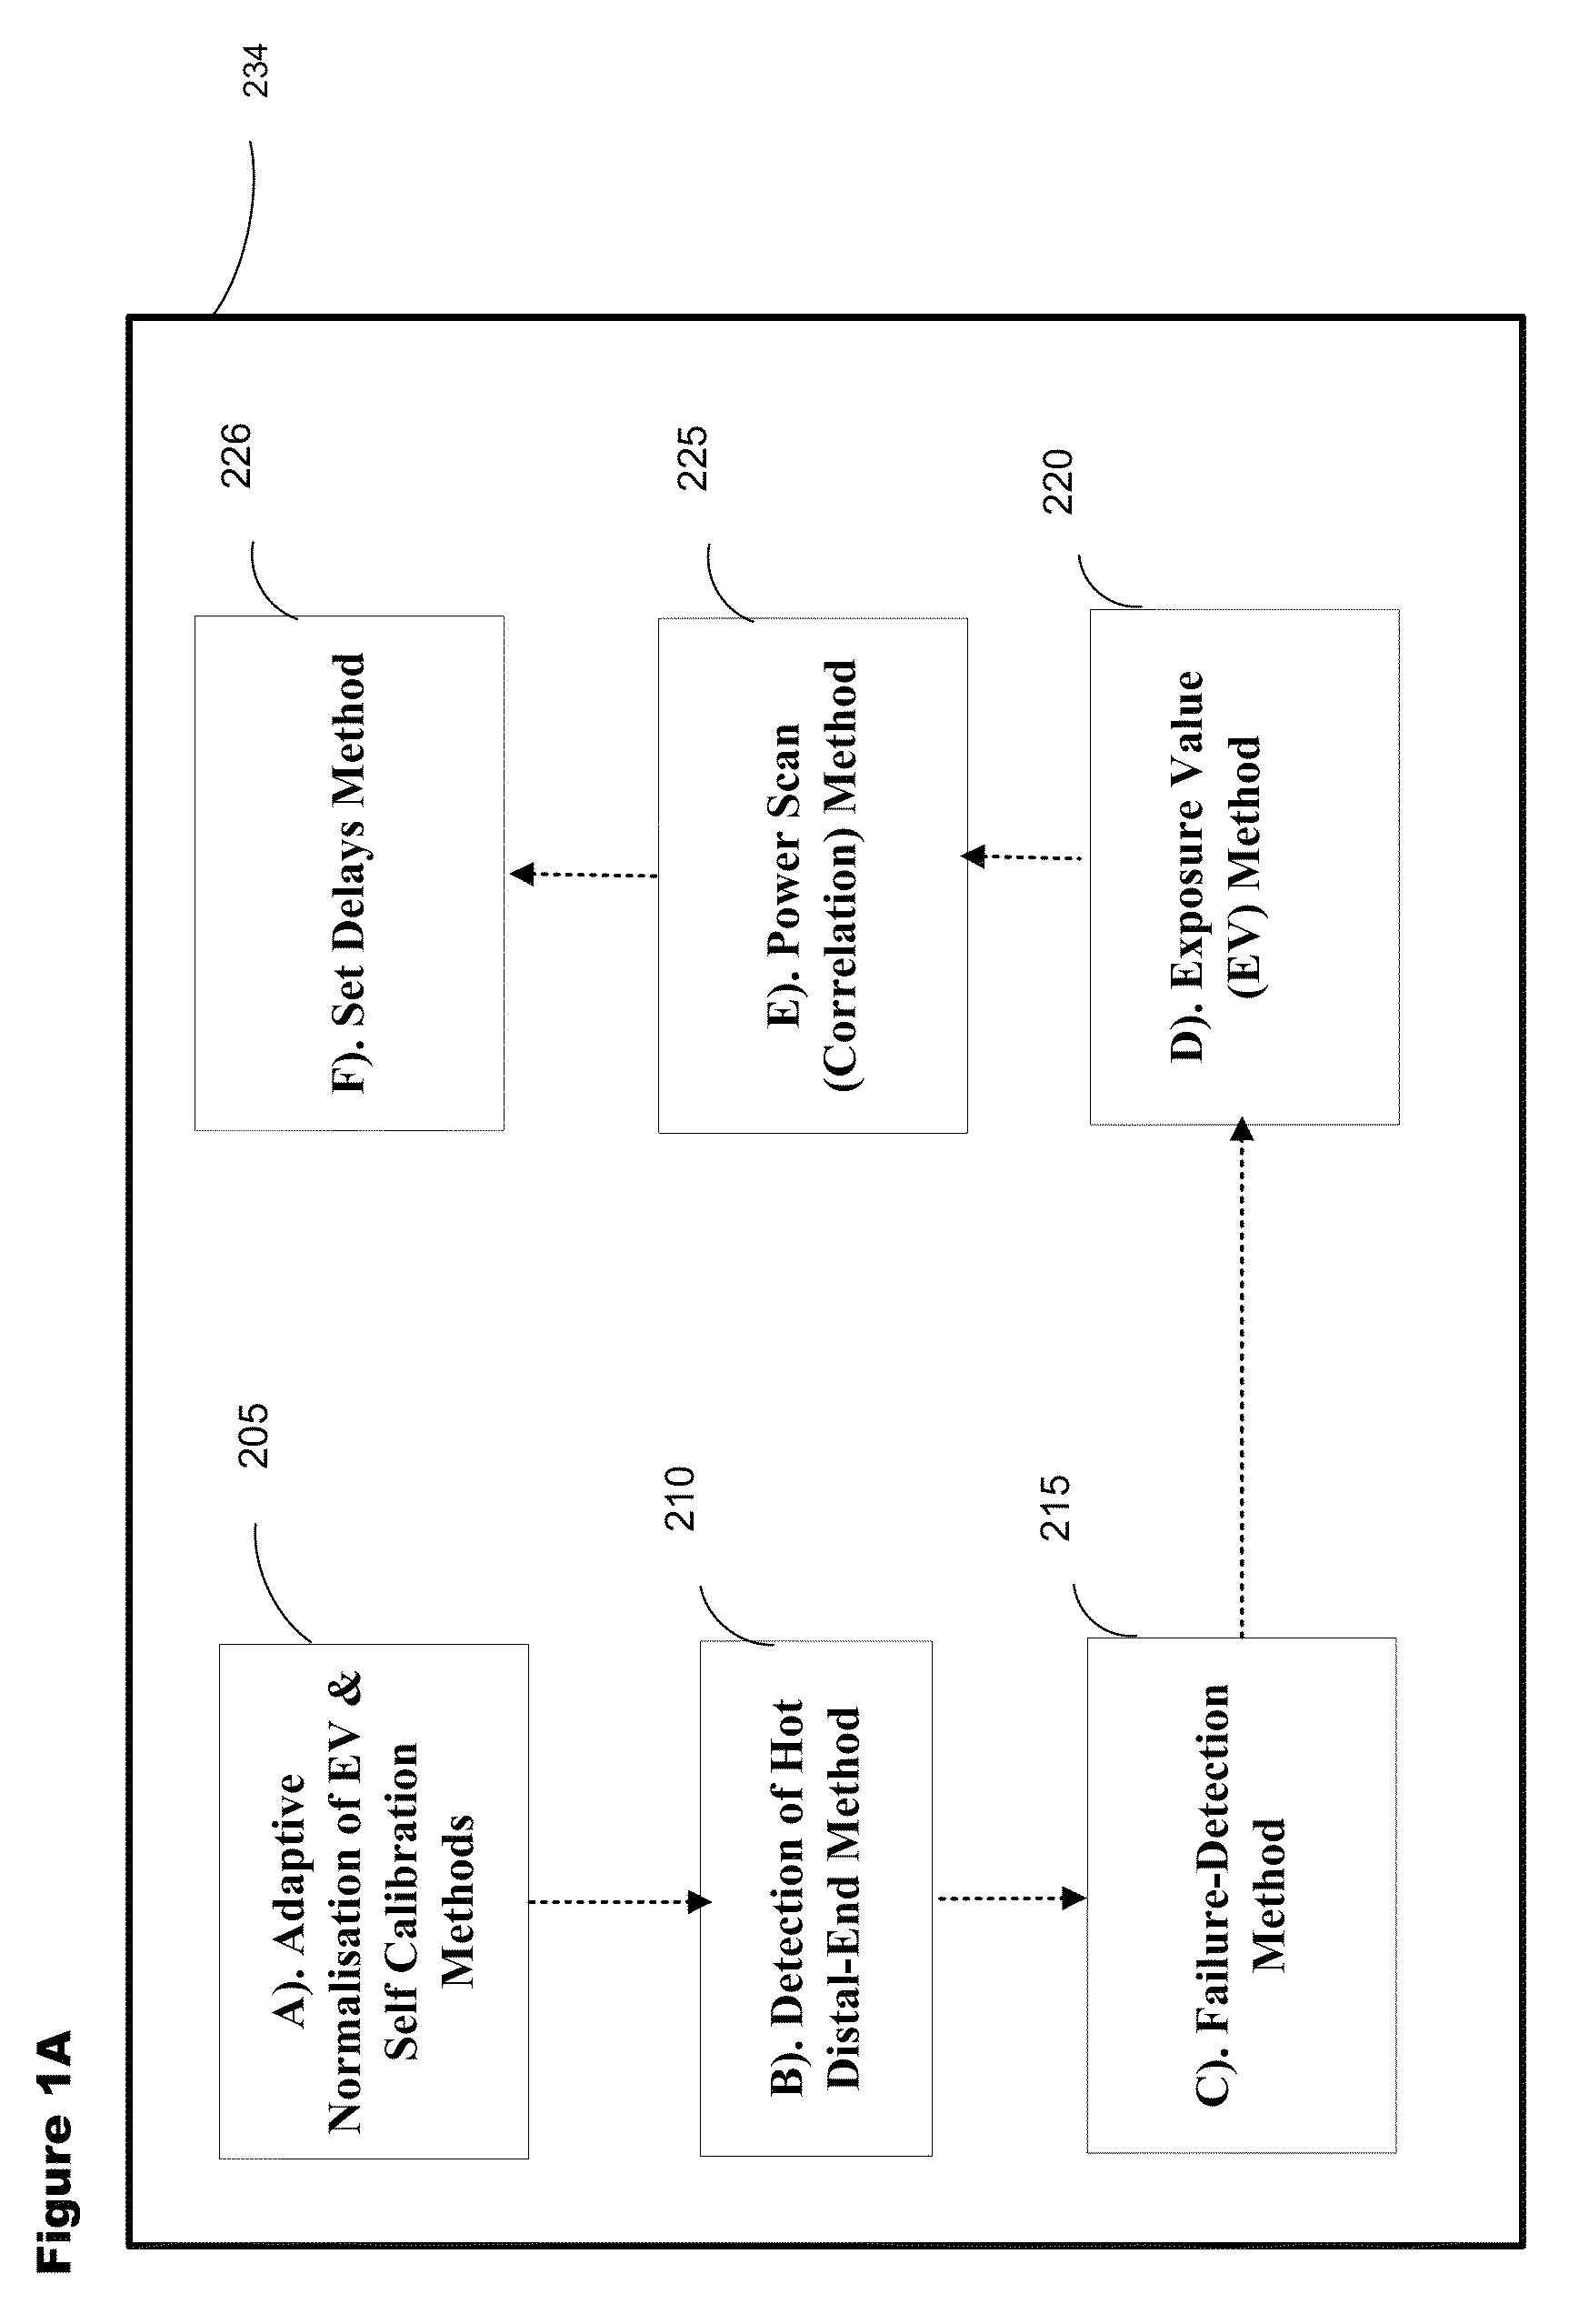 Method and apparatus for protection from high intensity light